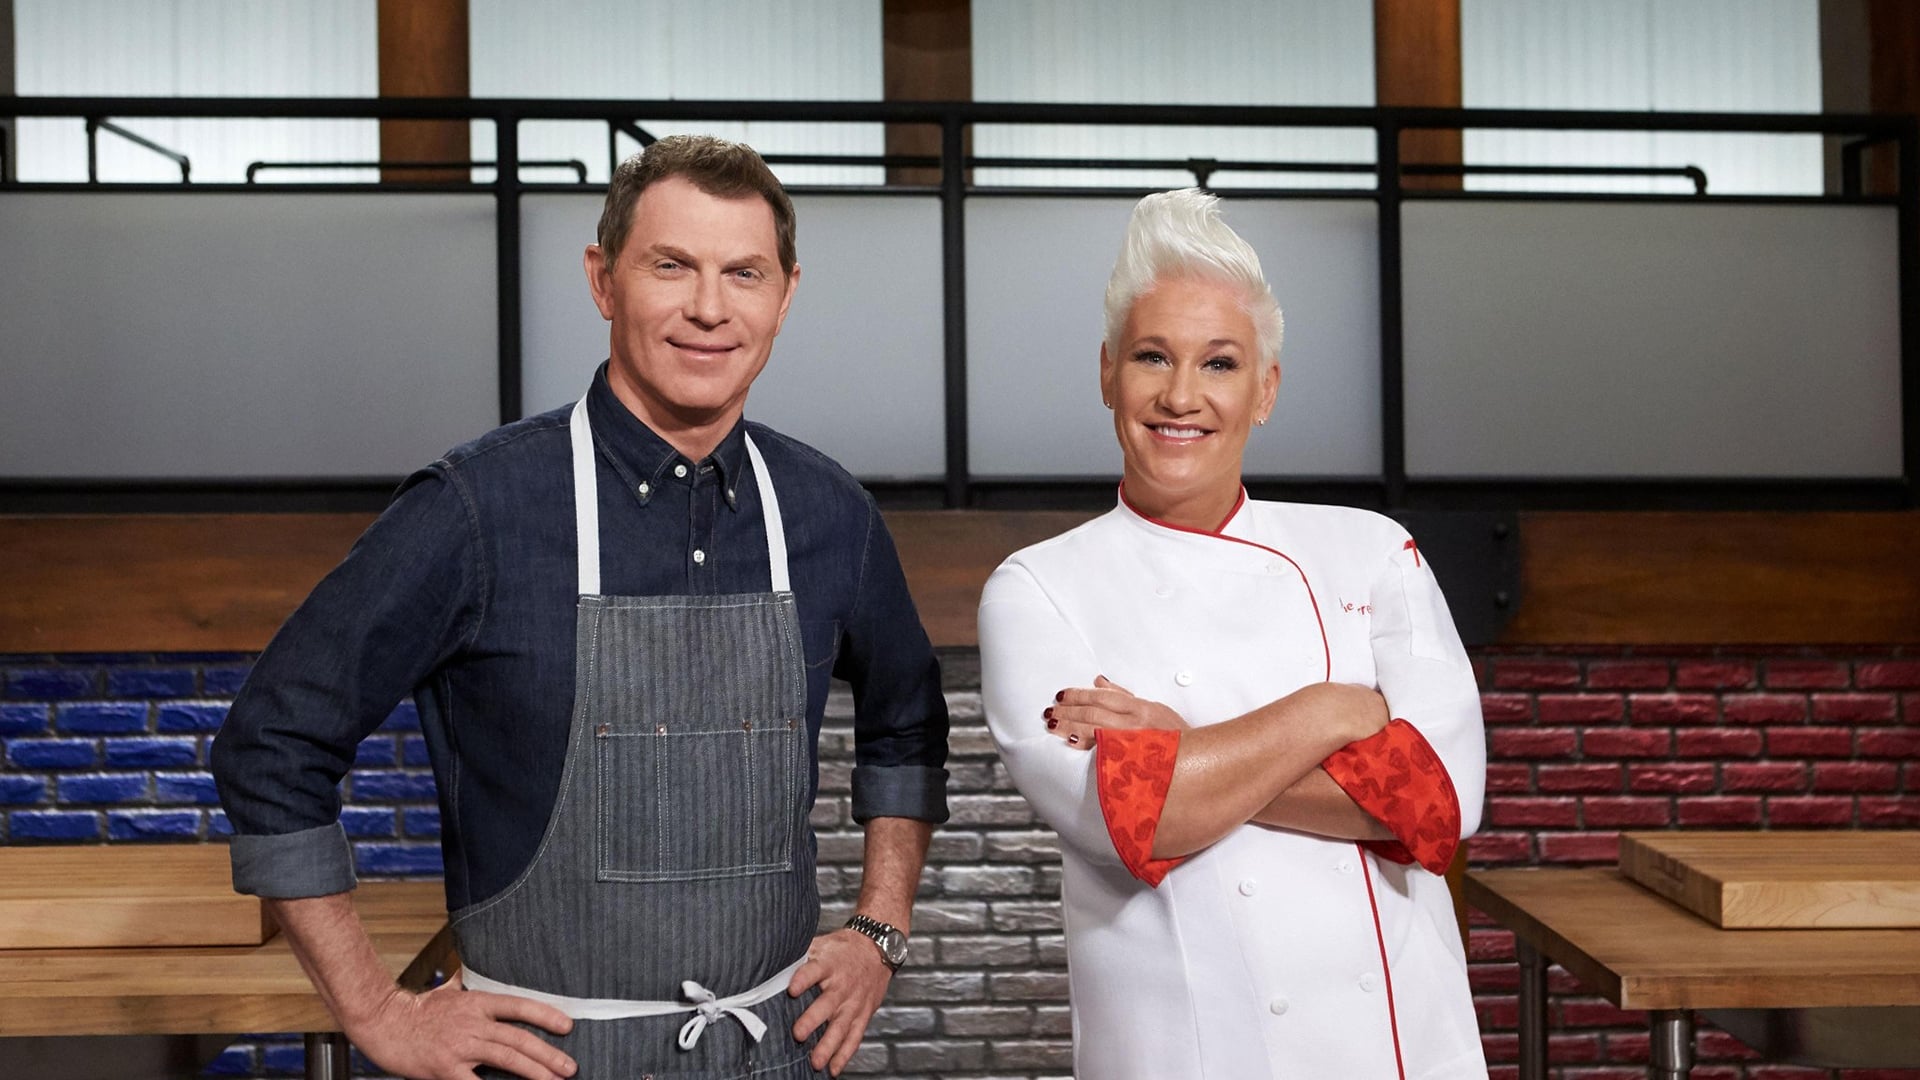 Eight Of The Worst Celebrity Cooks In America Arrive At Culinary Boot Camp